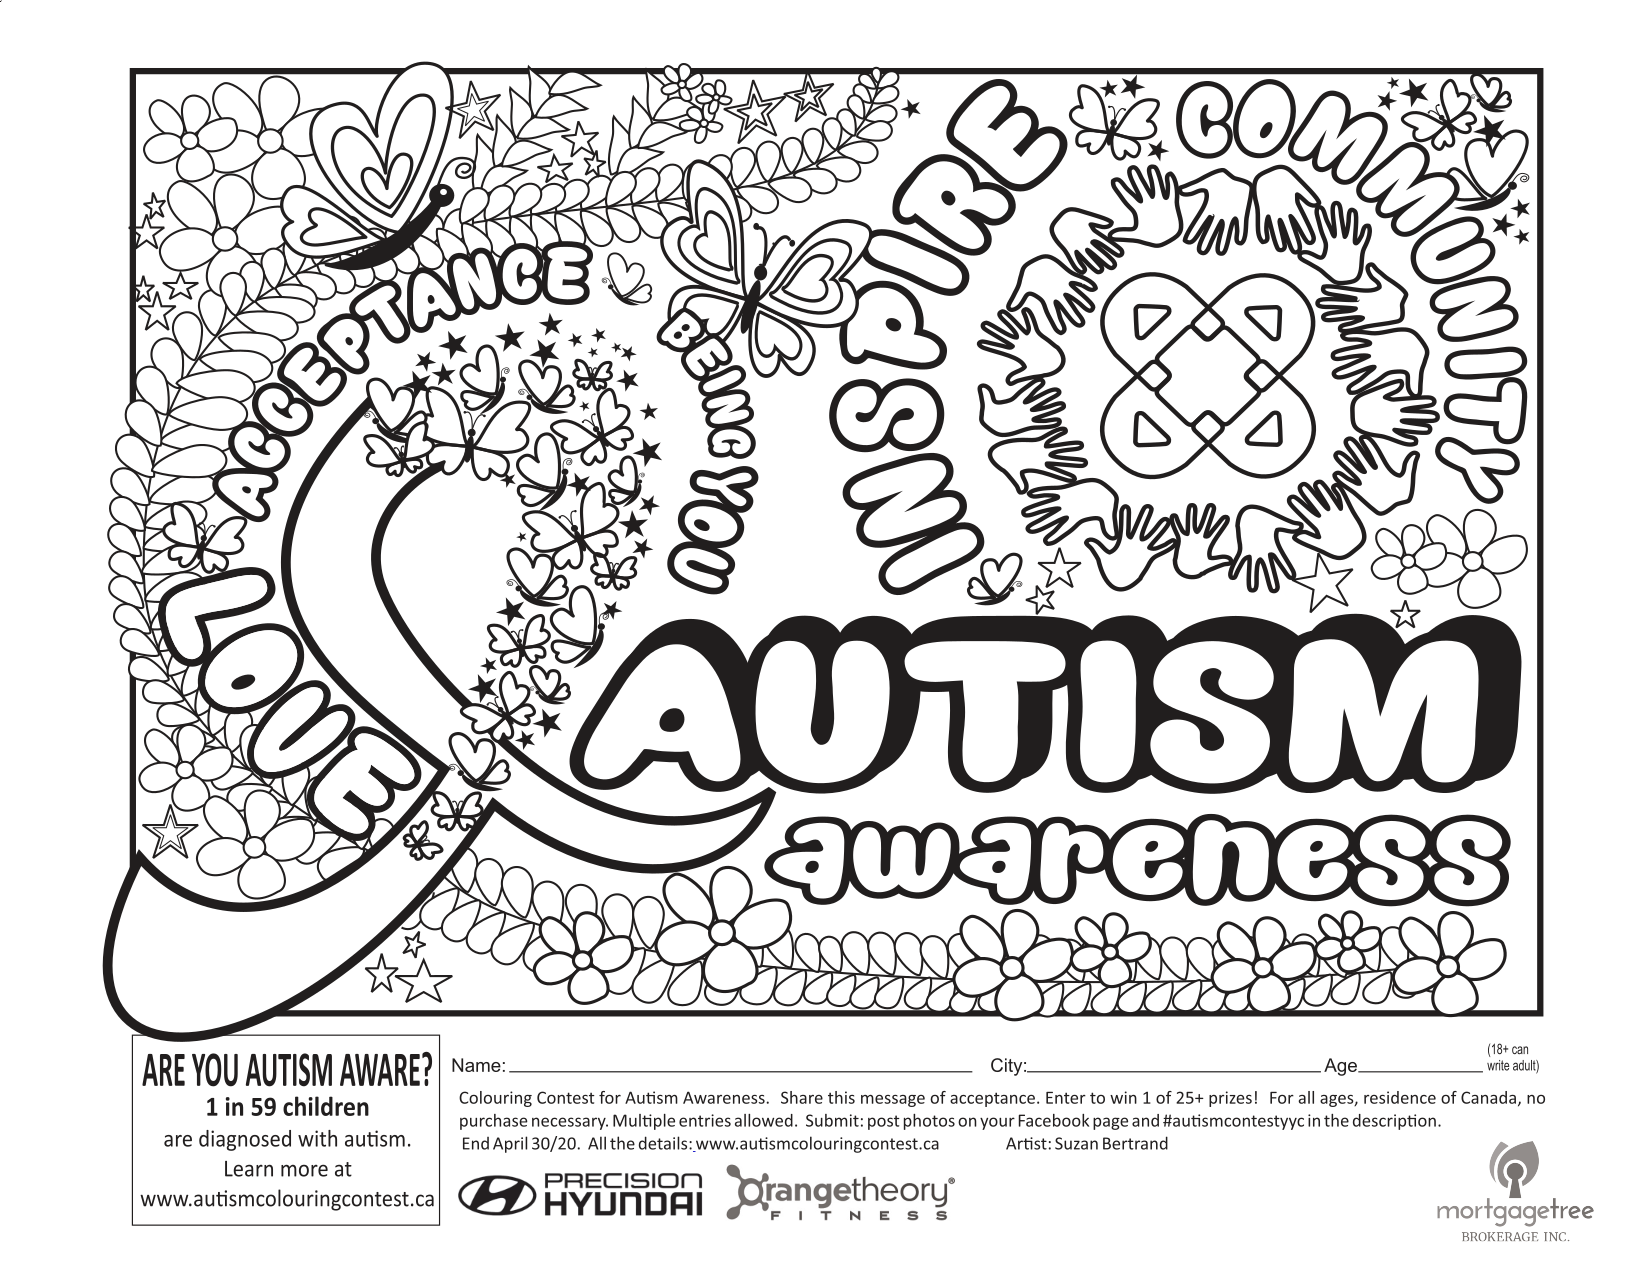 Welcome to the 2023 Autism Awareness Colouring Contest! 